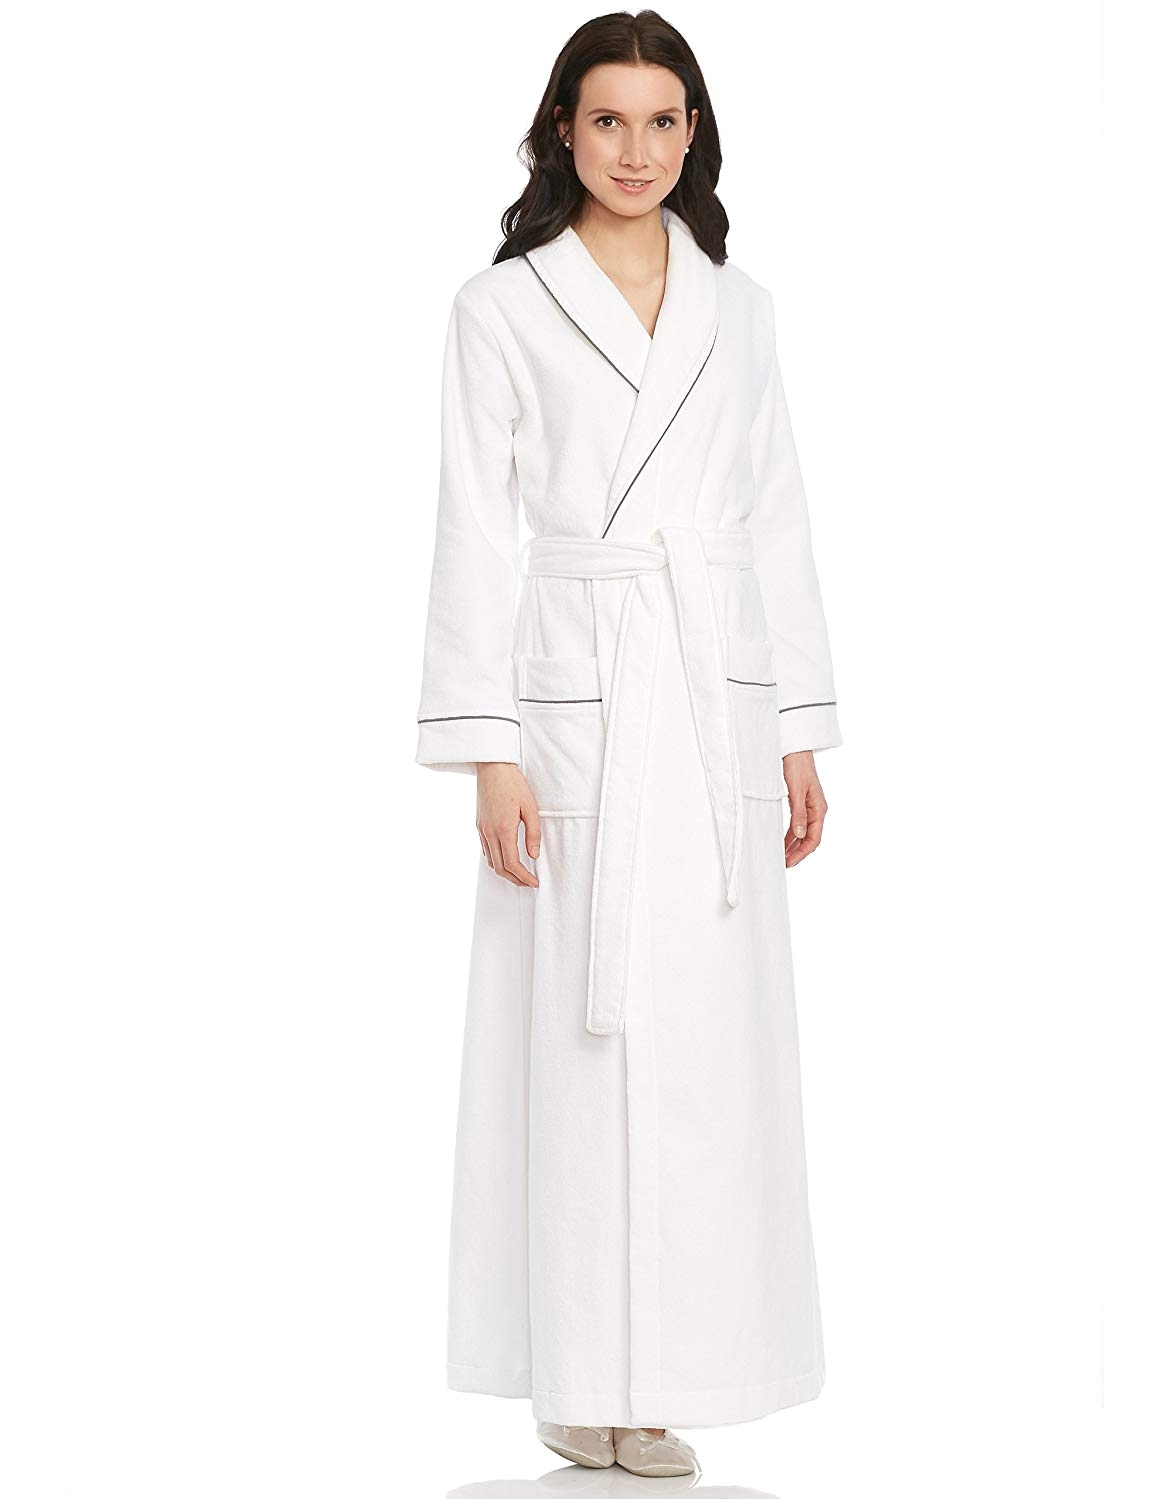 cinderella long women s long terry robe white with gray piping large at amazon women s clothing store